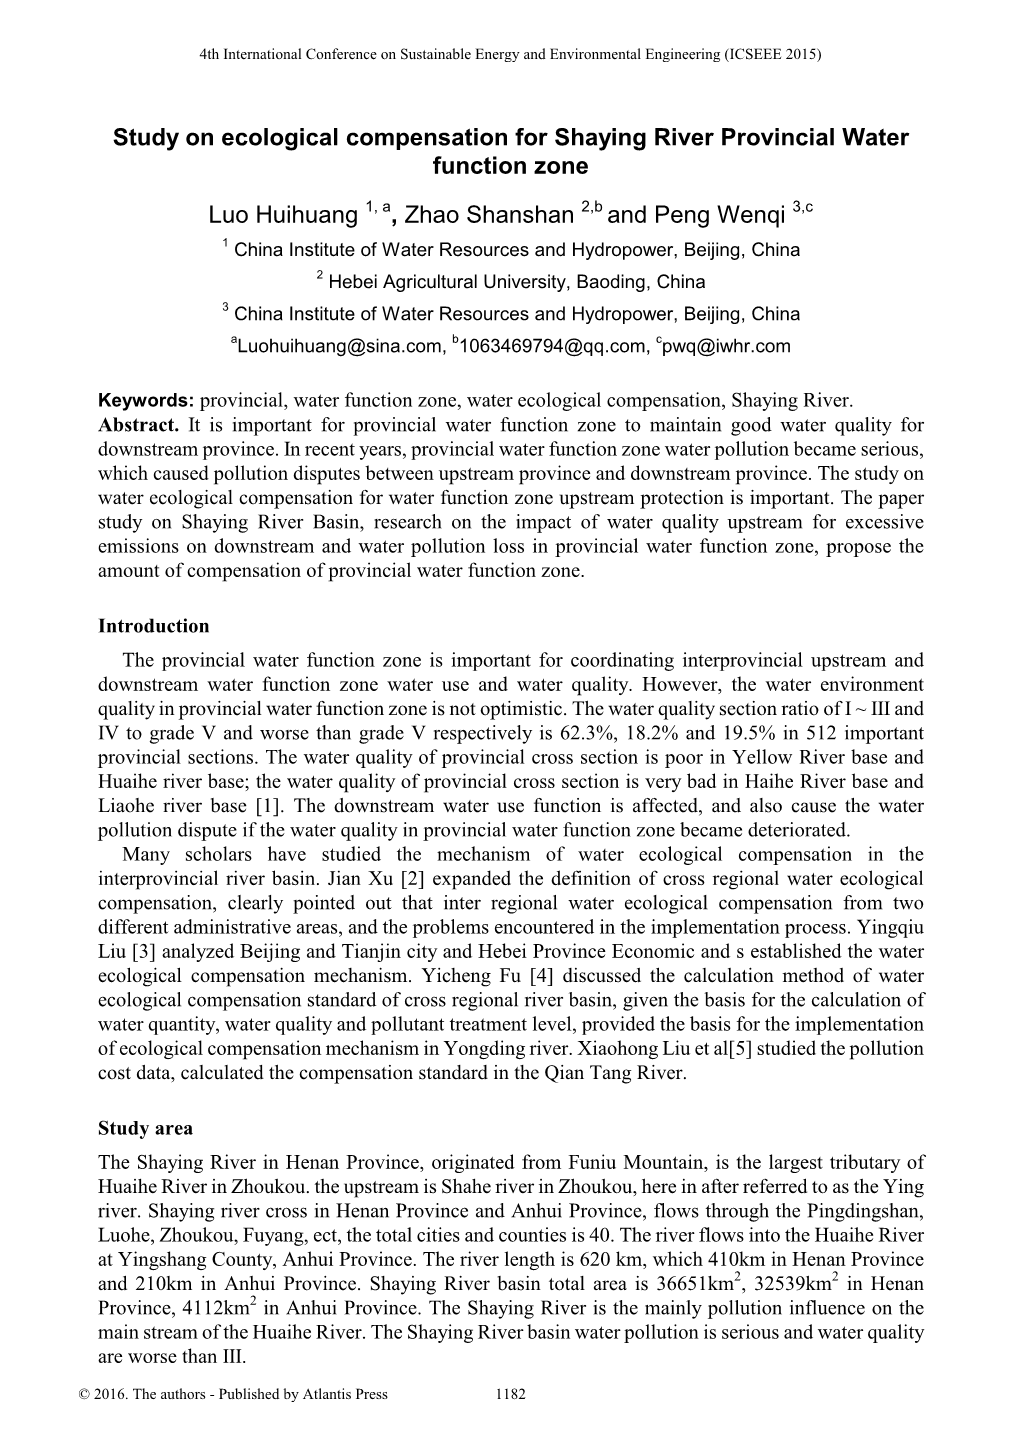 Study on Ecological Compensation for Shaying River Provincial Water Function Zone Luo Huihuang , Zhao Shanshan and Peng Wenqi